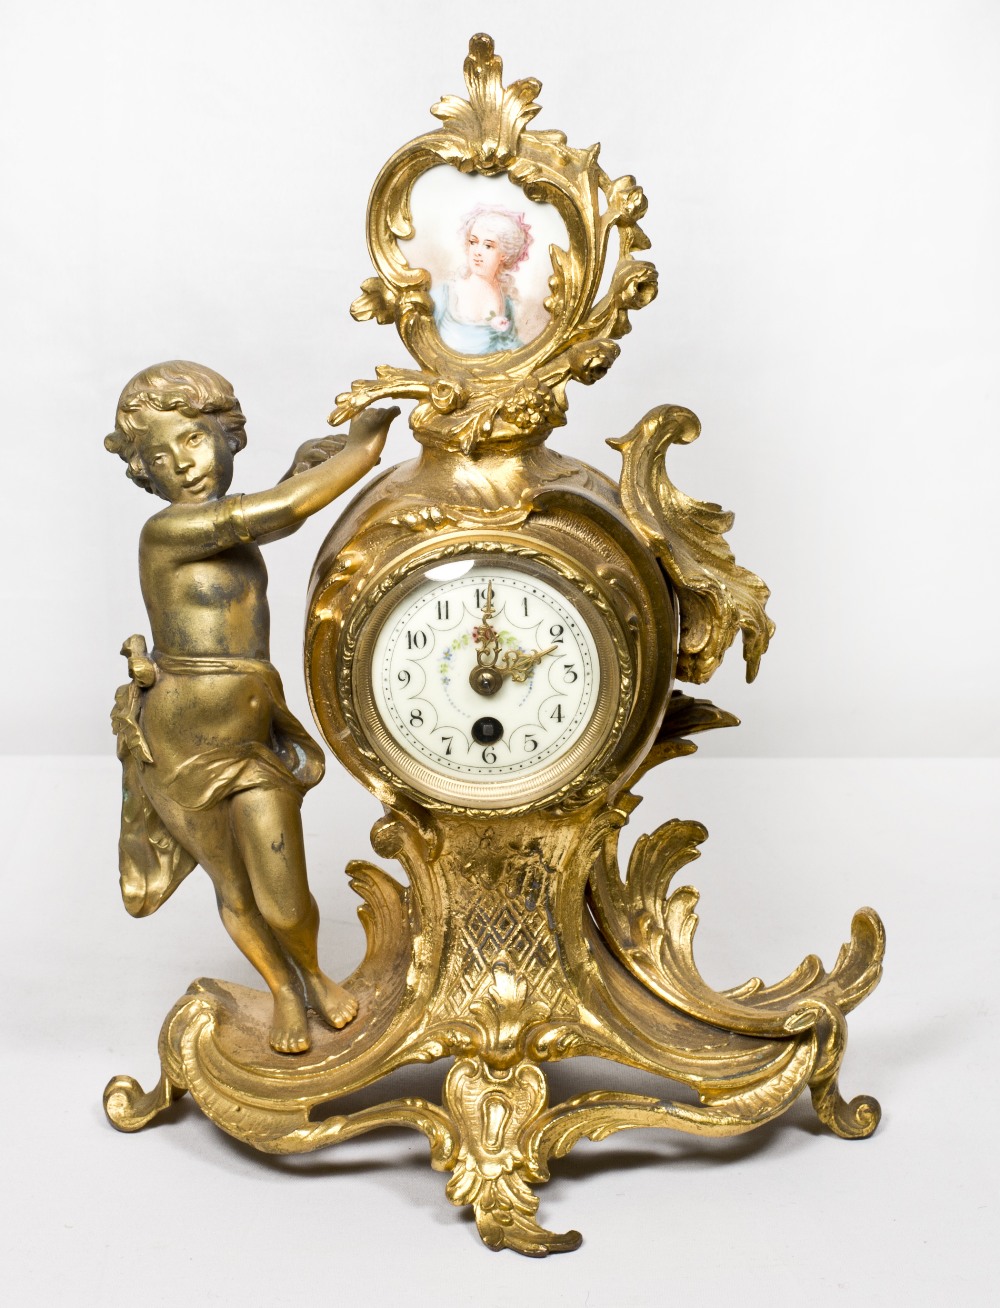 A 19th Century mantel clock with white enamel dial, in a gilded spelter case, the top inset portrait